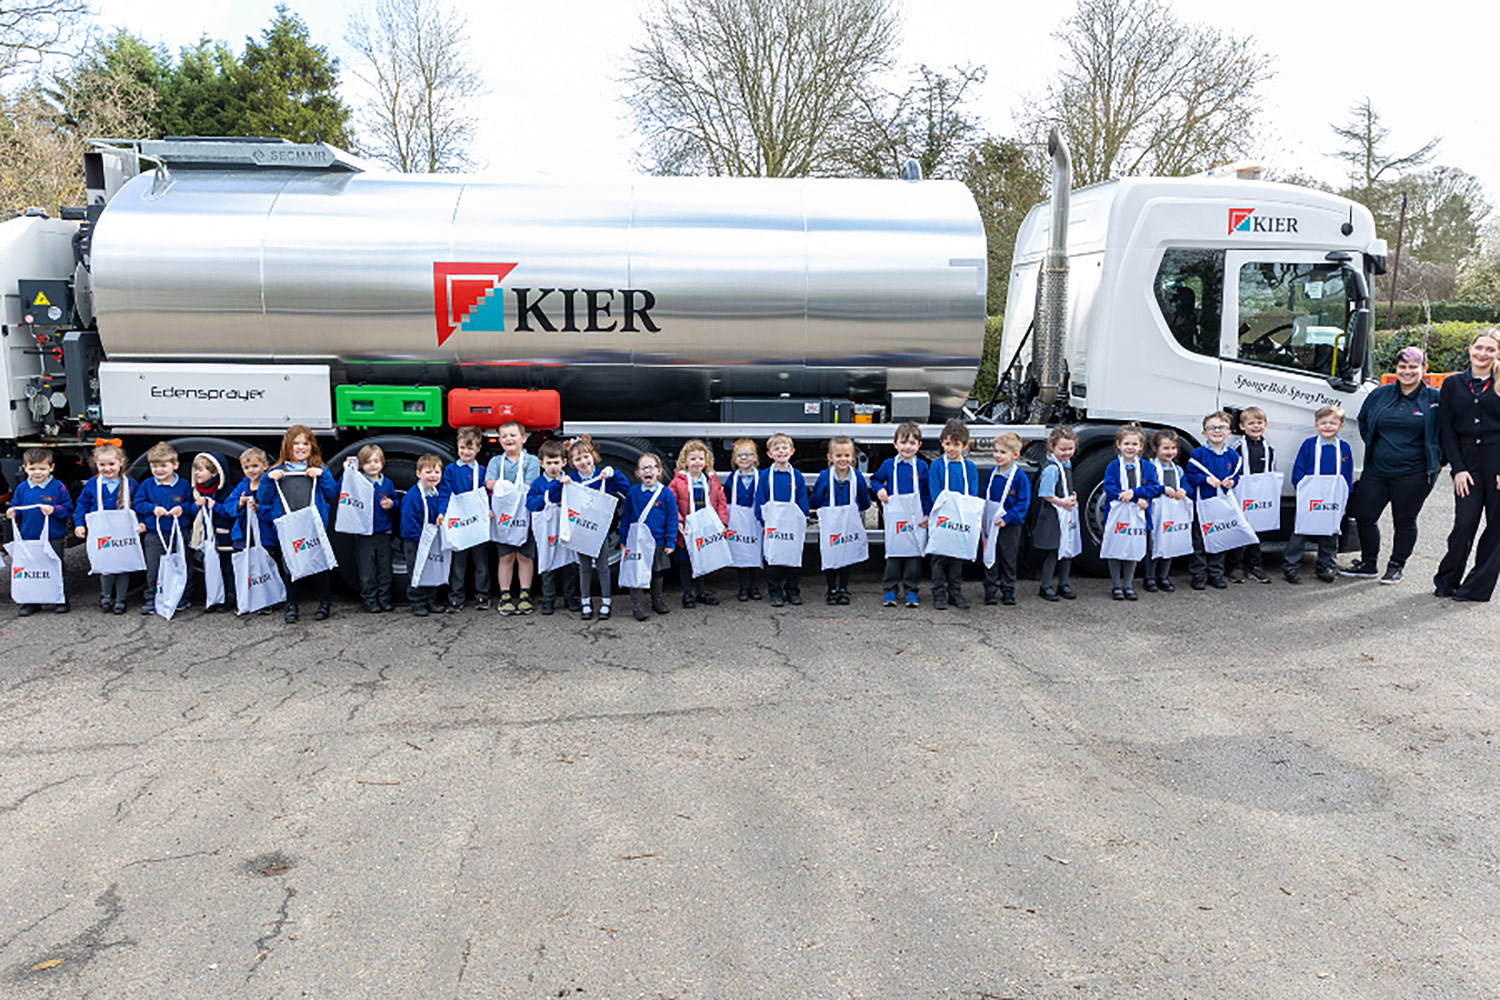 Kier Transportation’s industry-leading approach is recognised with Gold